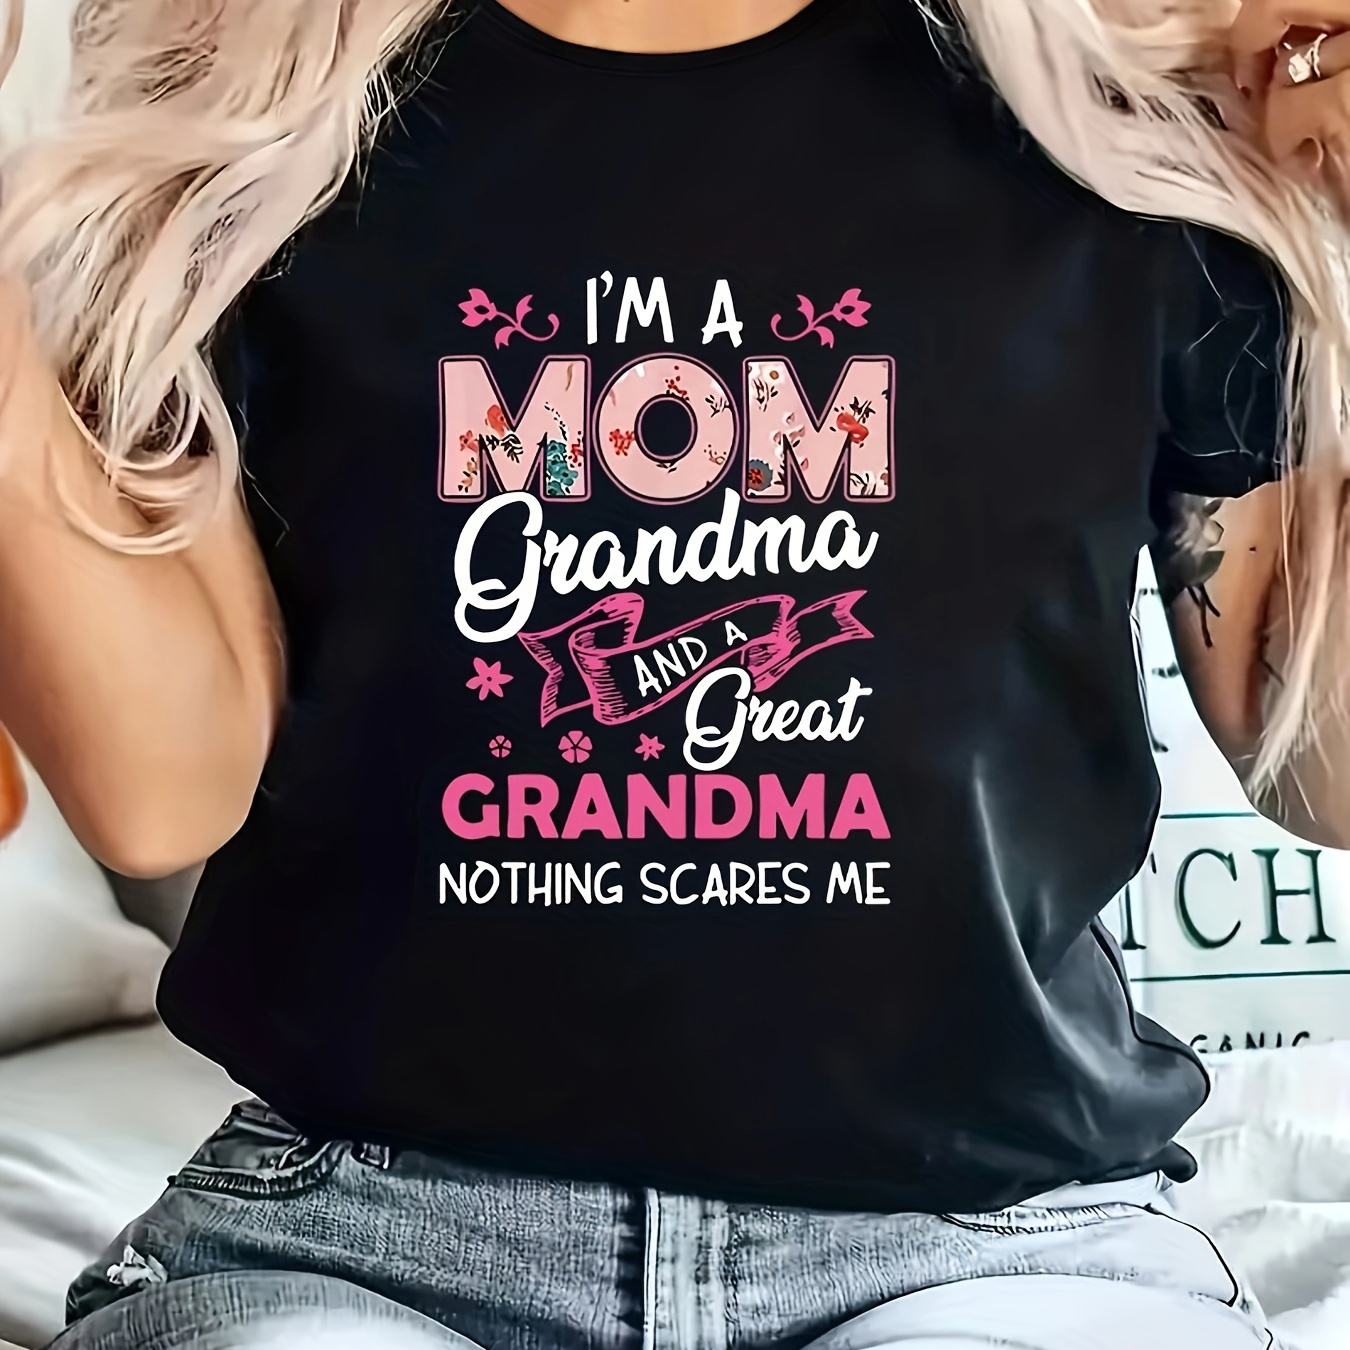 

Women's Plus Size Casual Sporty T-shirt, "i'm A Mom, Grandma And Great Grandma" Print, Comfort Fit Short Sleeve Tee, Fashion Breathable Casual Top